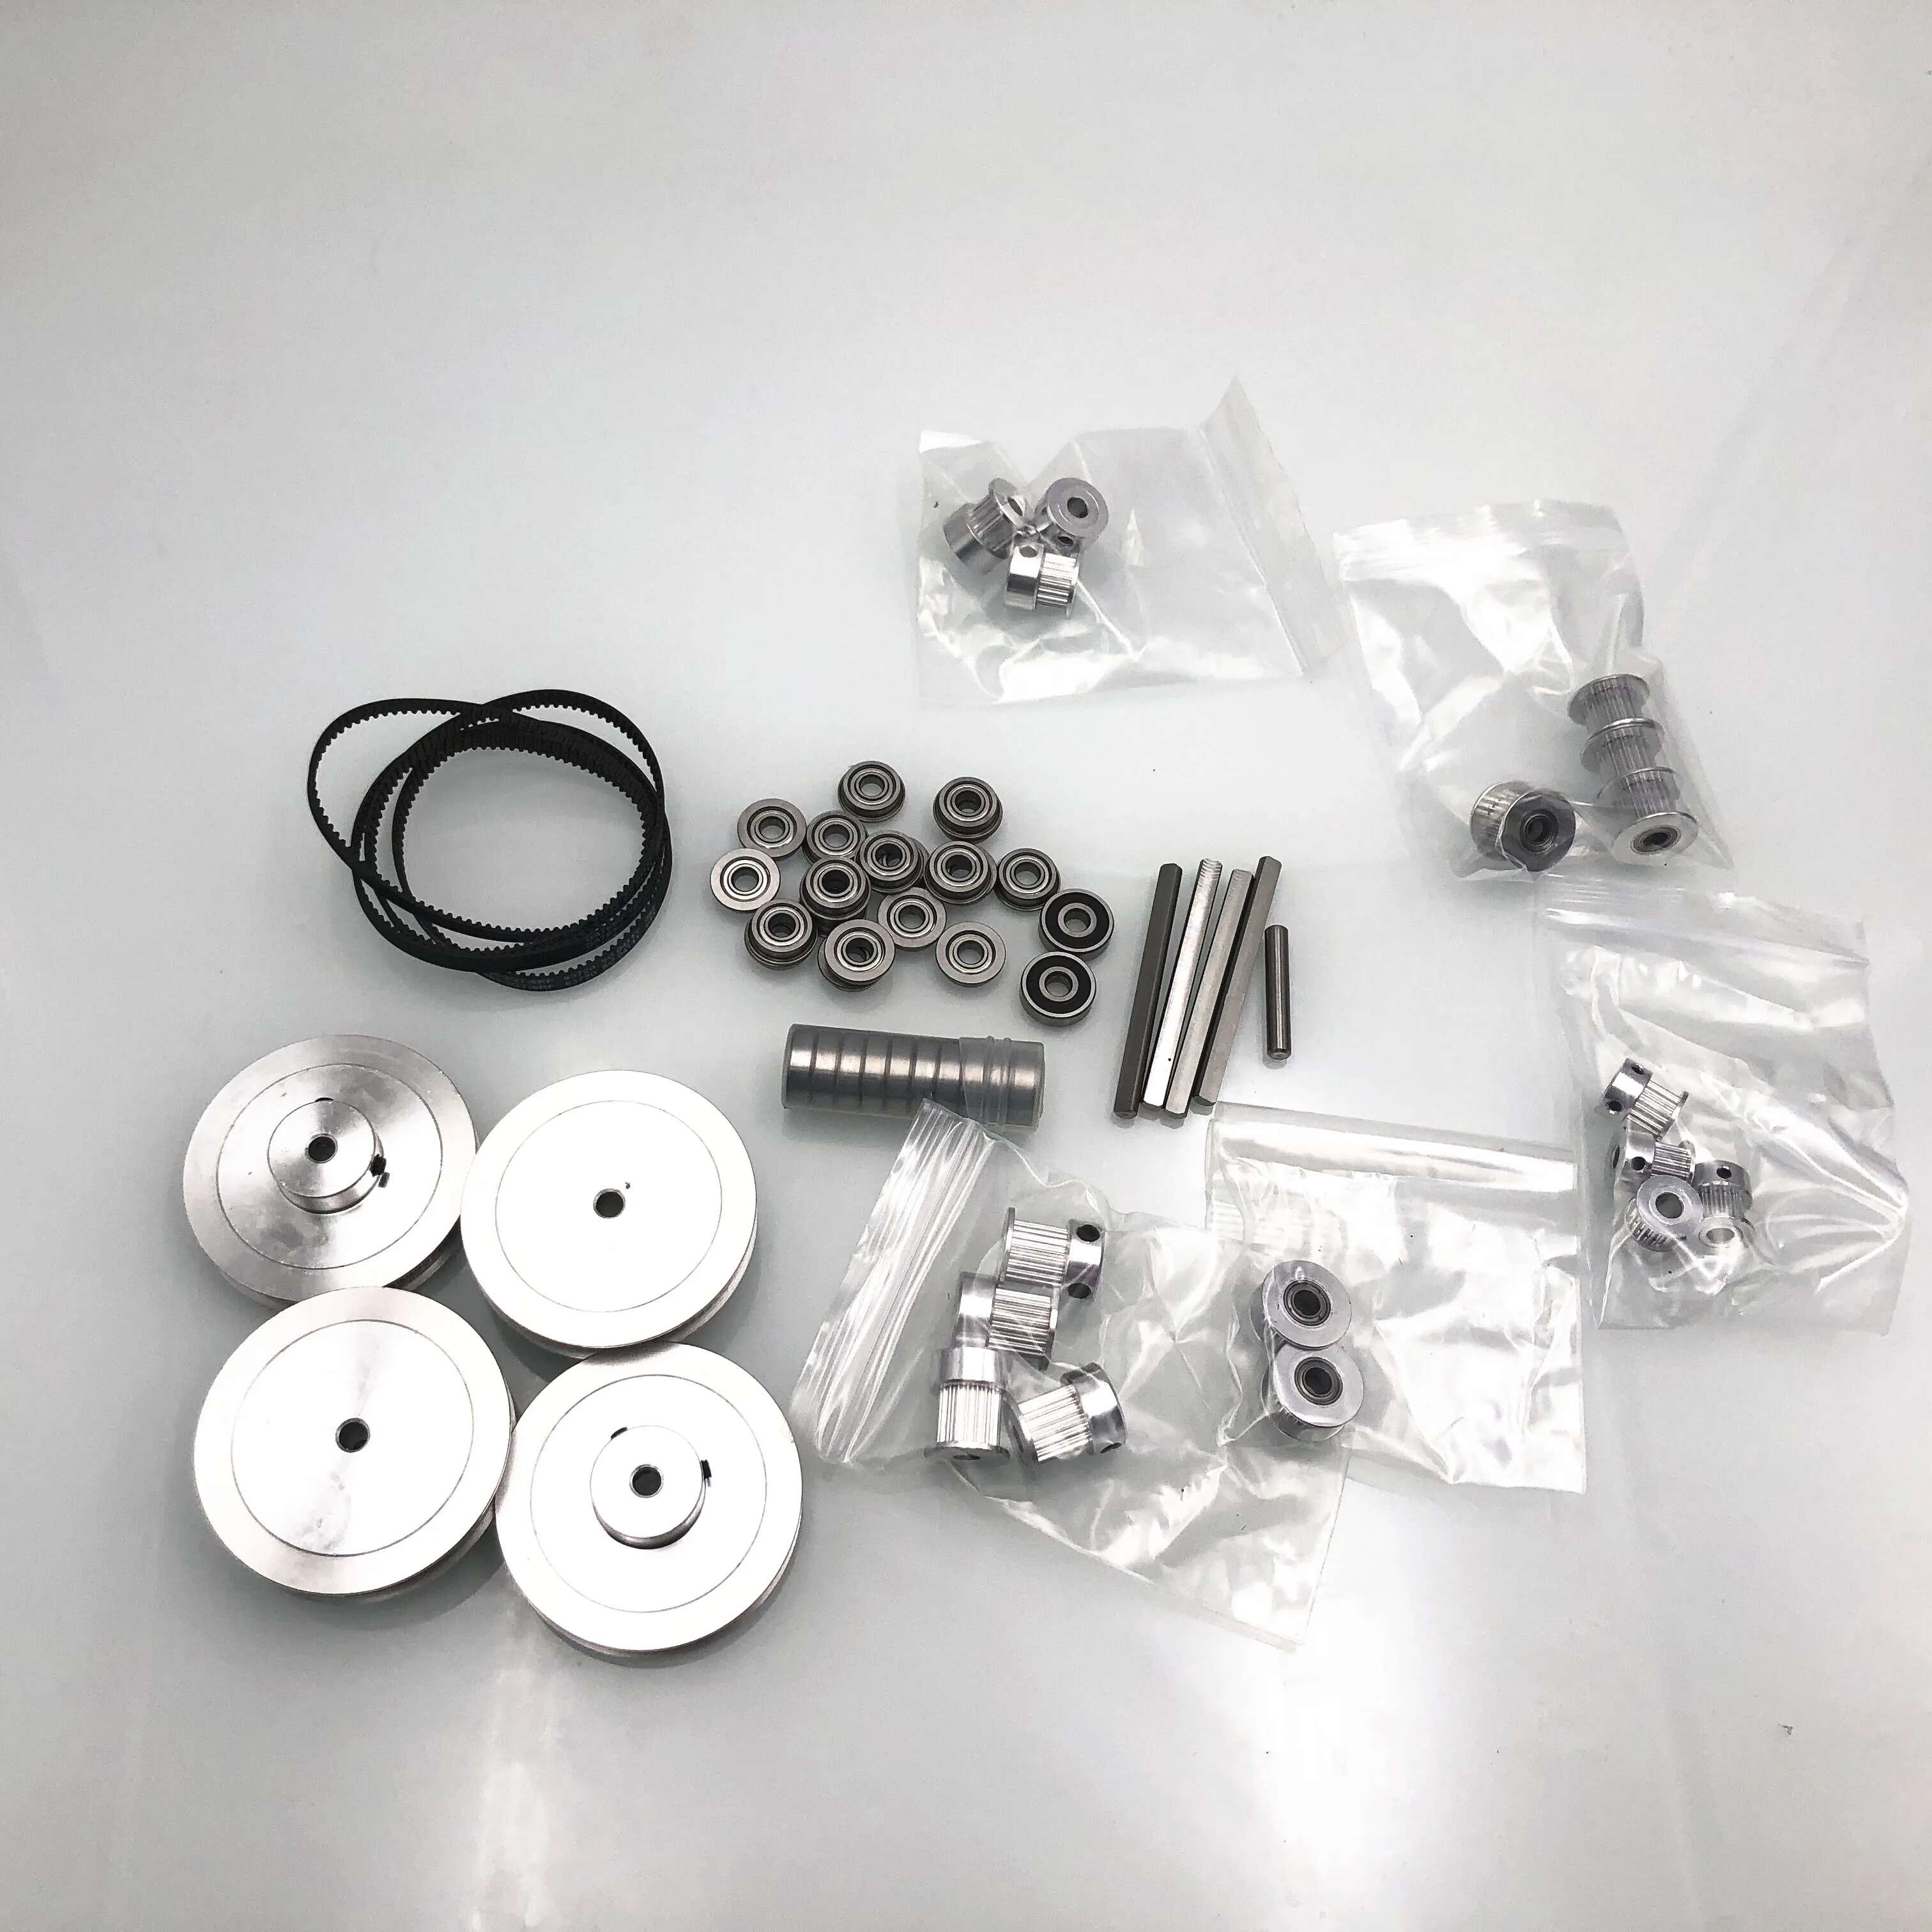 voron 2 4 3d printer mechanical fasteners screw nuts motion 80t pulley gates belt set free global shipping